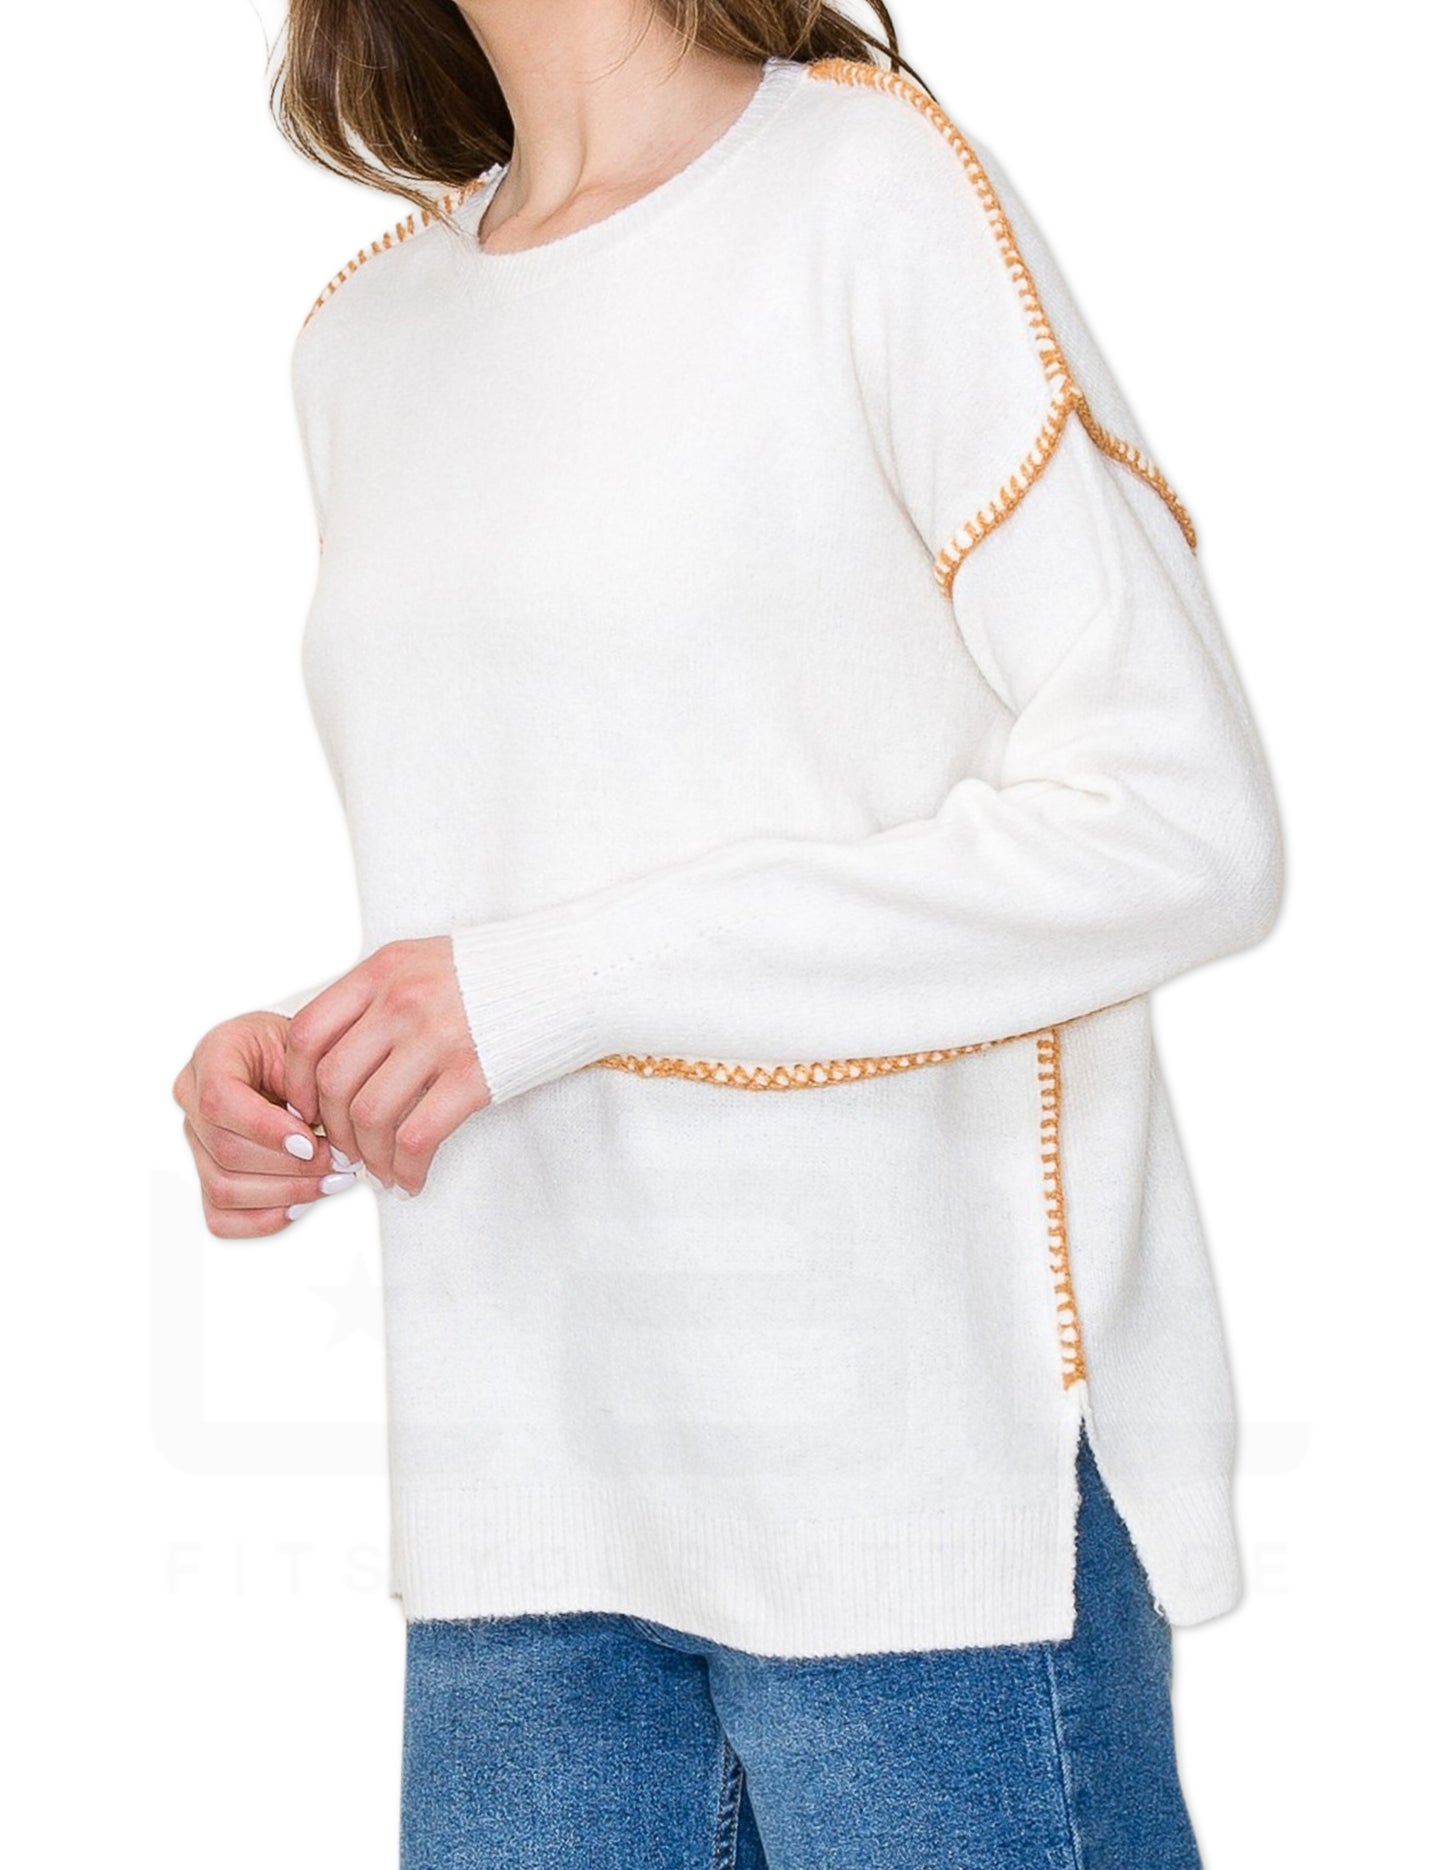 Exposed Seam Sweater - Camel and Ivory